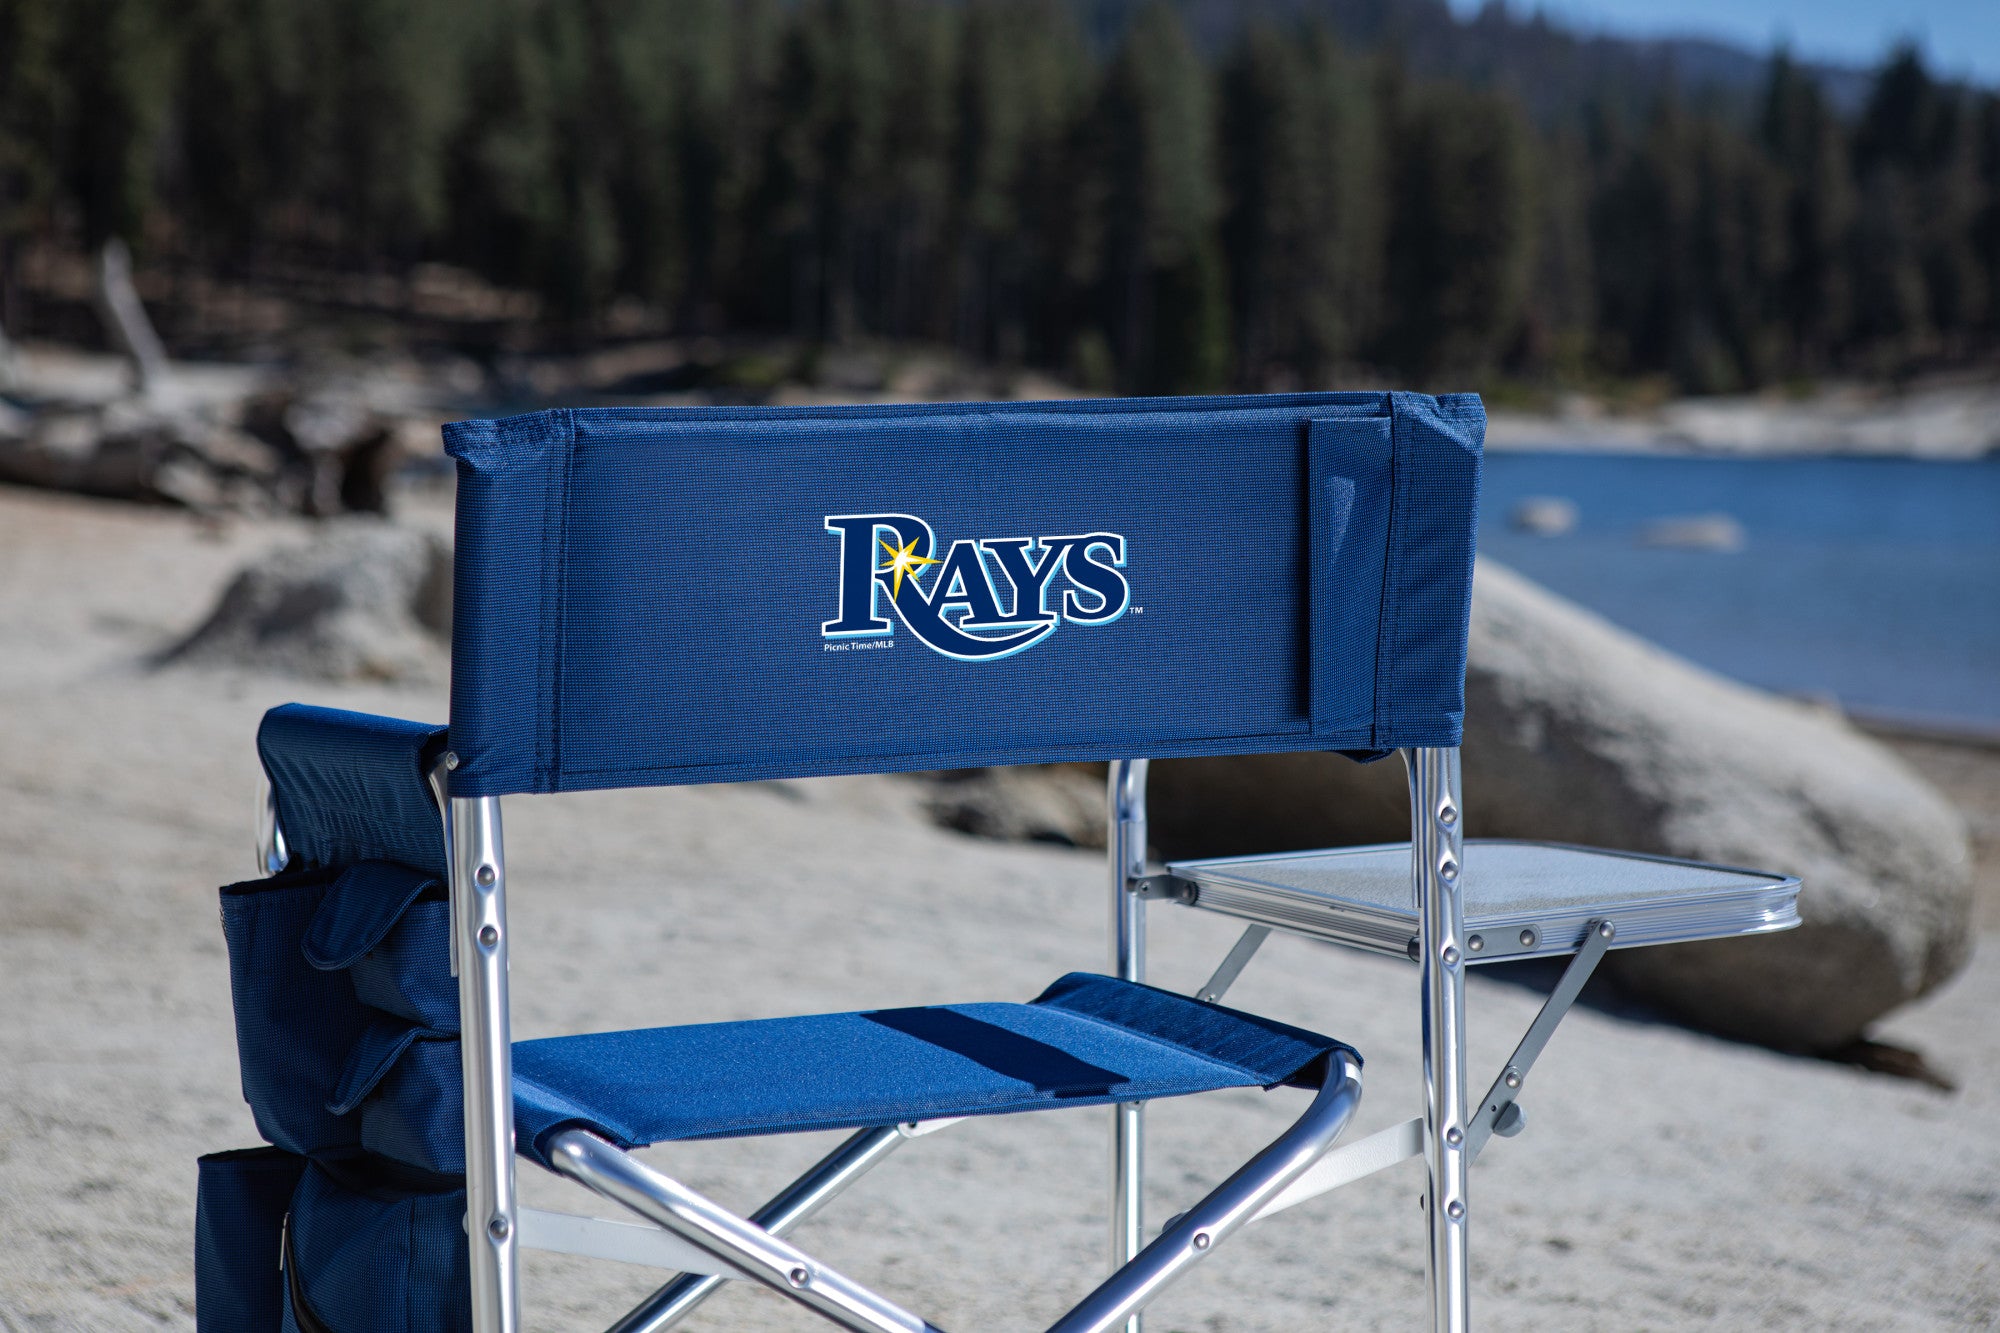 Tampa Bay Rays - Sports Chair